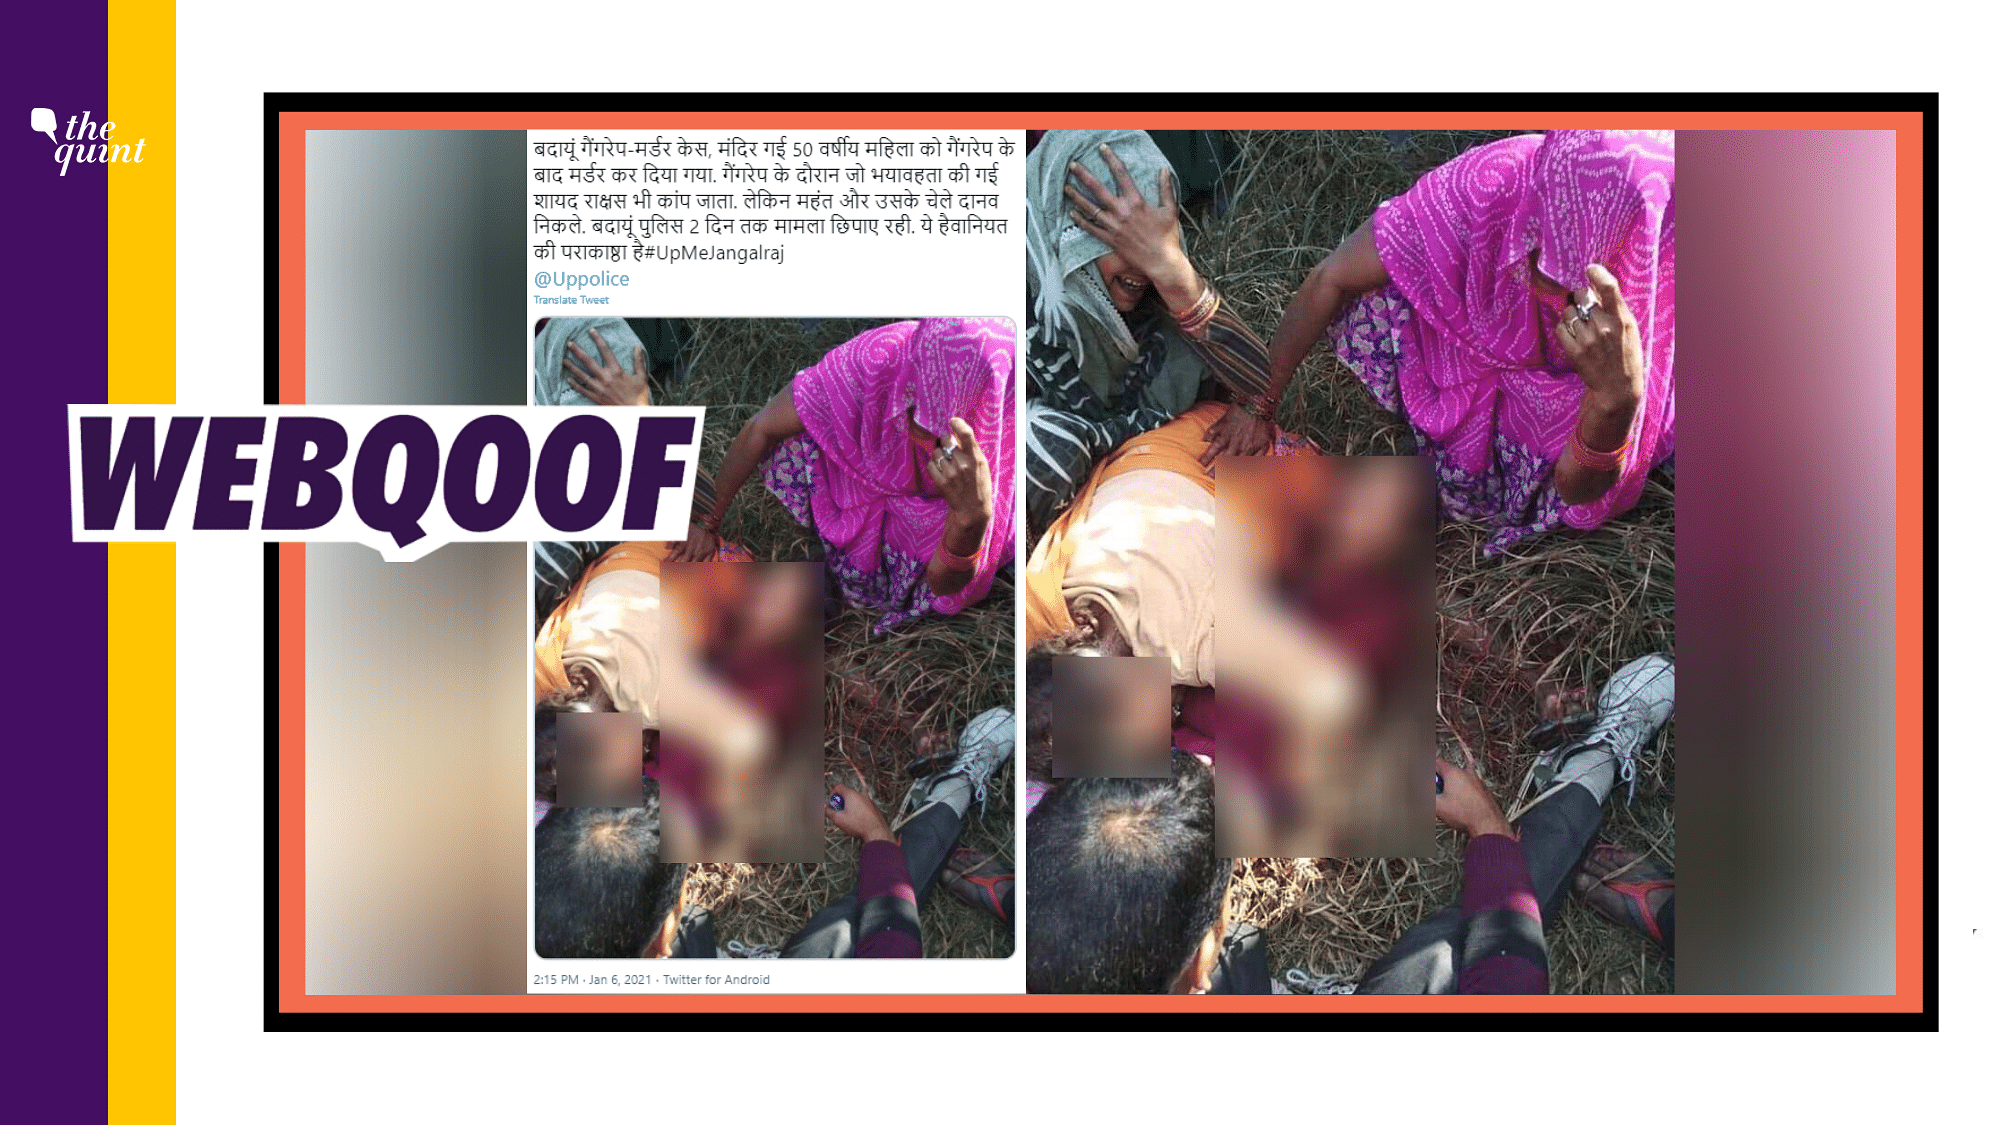 The image is from the Goldy Yadav Murder Case, that took place in Unnao in 2018.